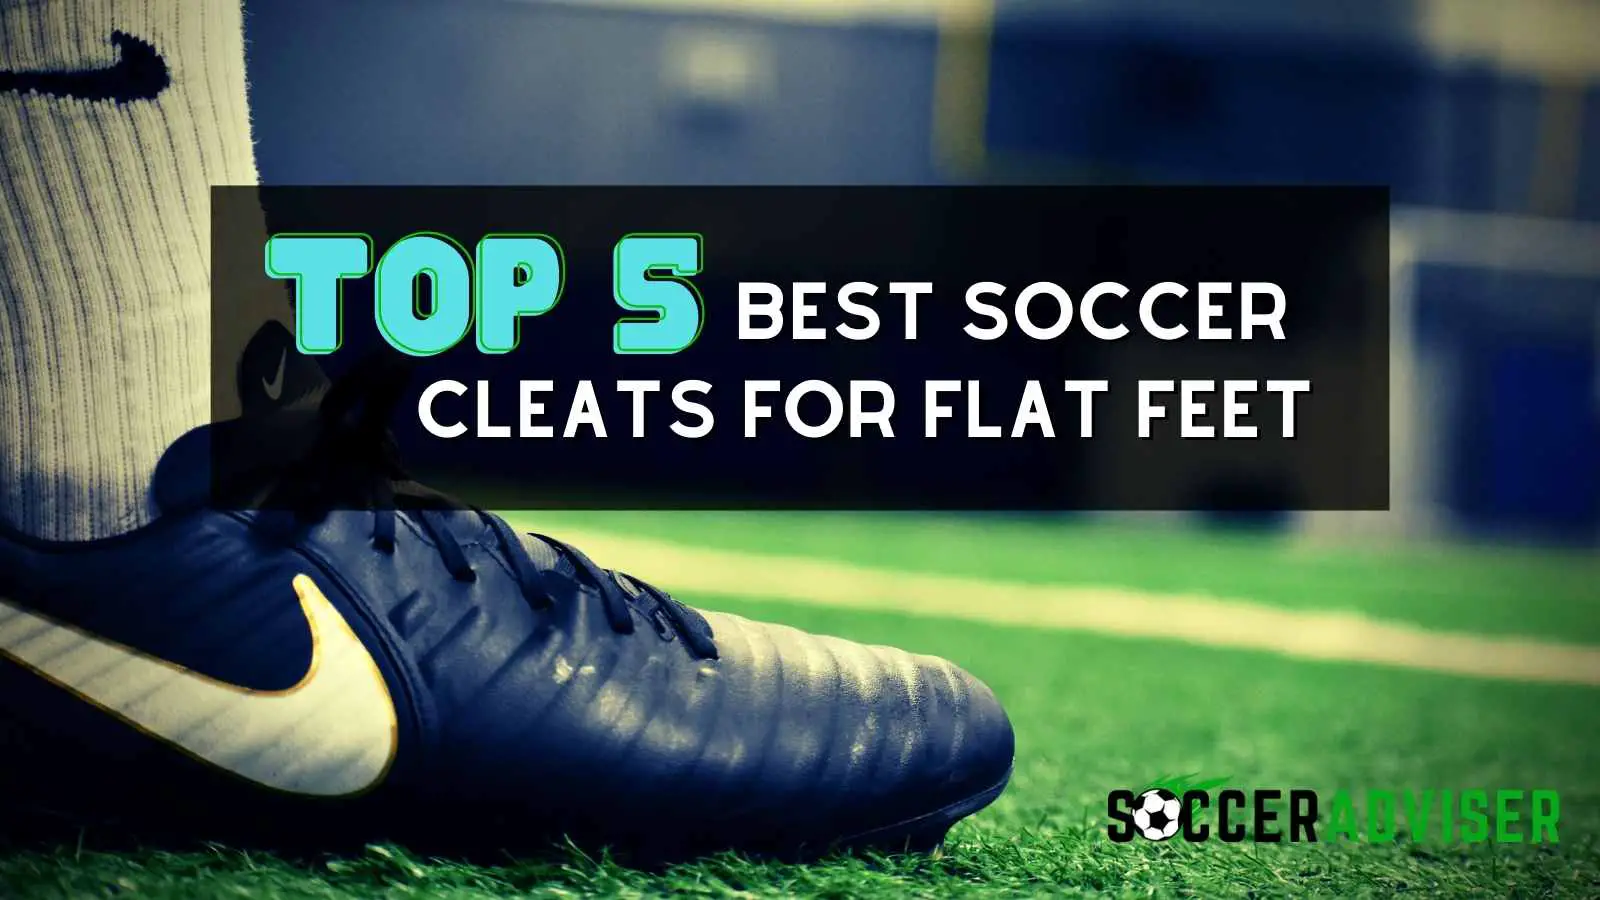 Top 5 Best Soccer Cleats For Flat Feet – (2022) Guide